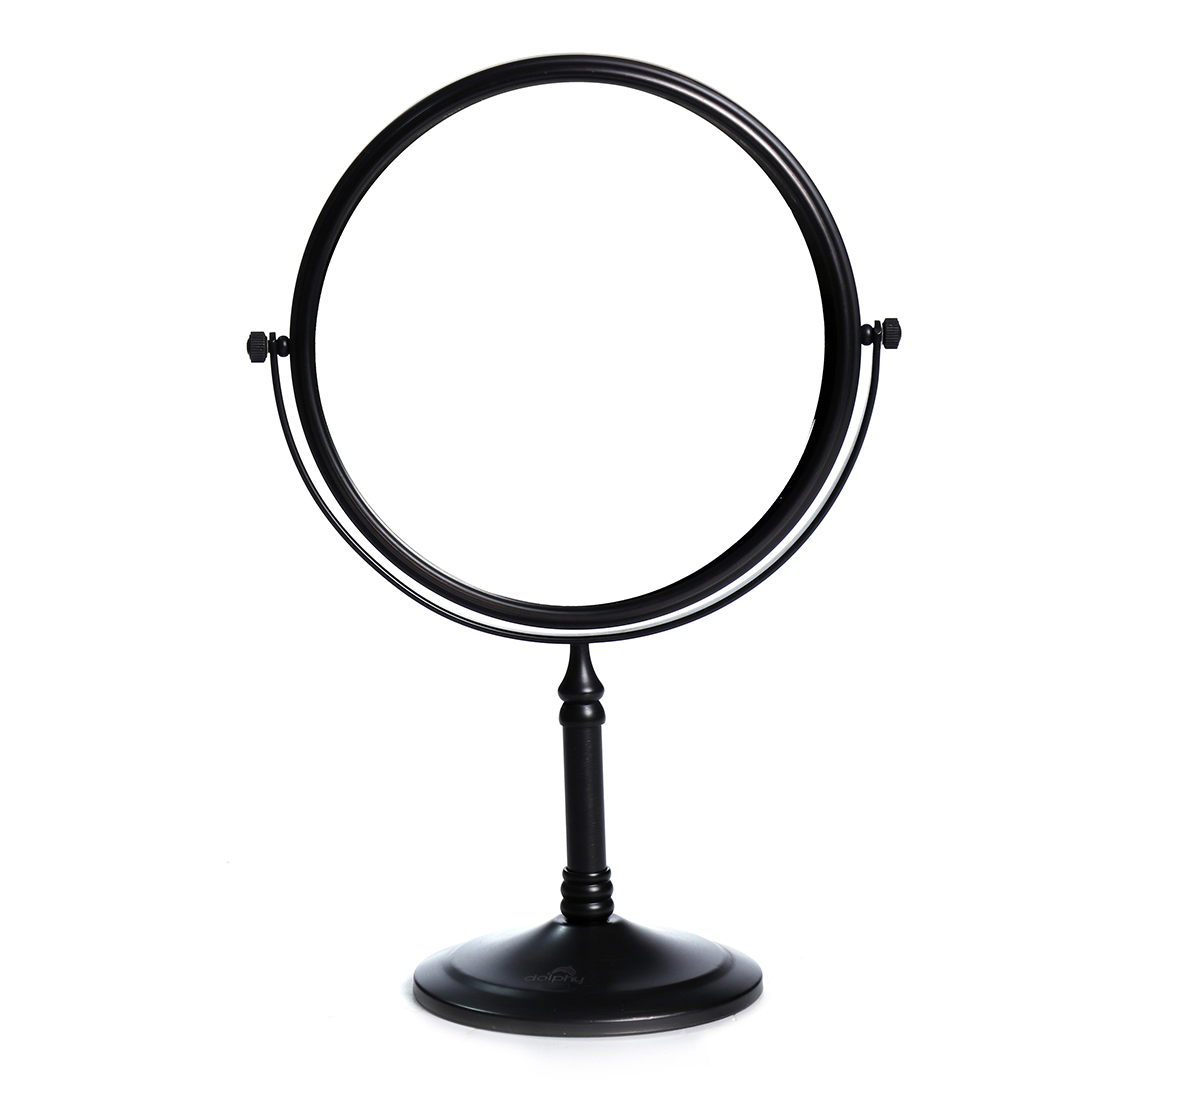 Stainless Steel Round Magnifying Mirror Black 8 Inch
